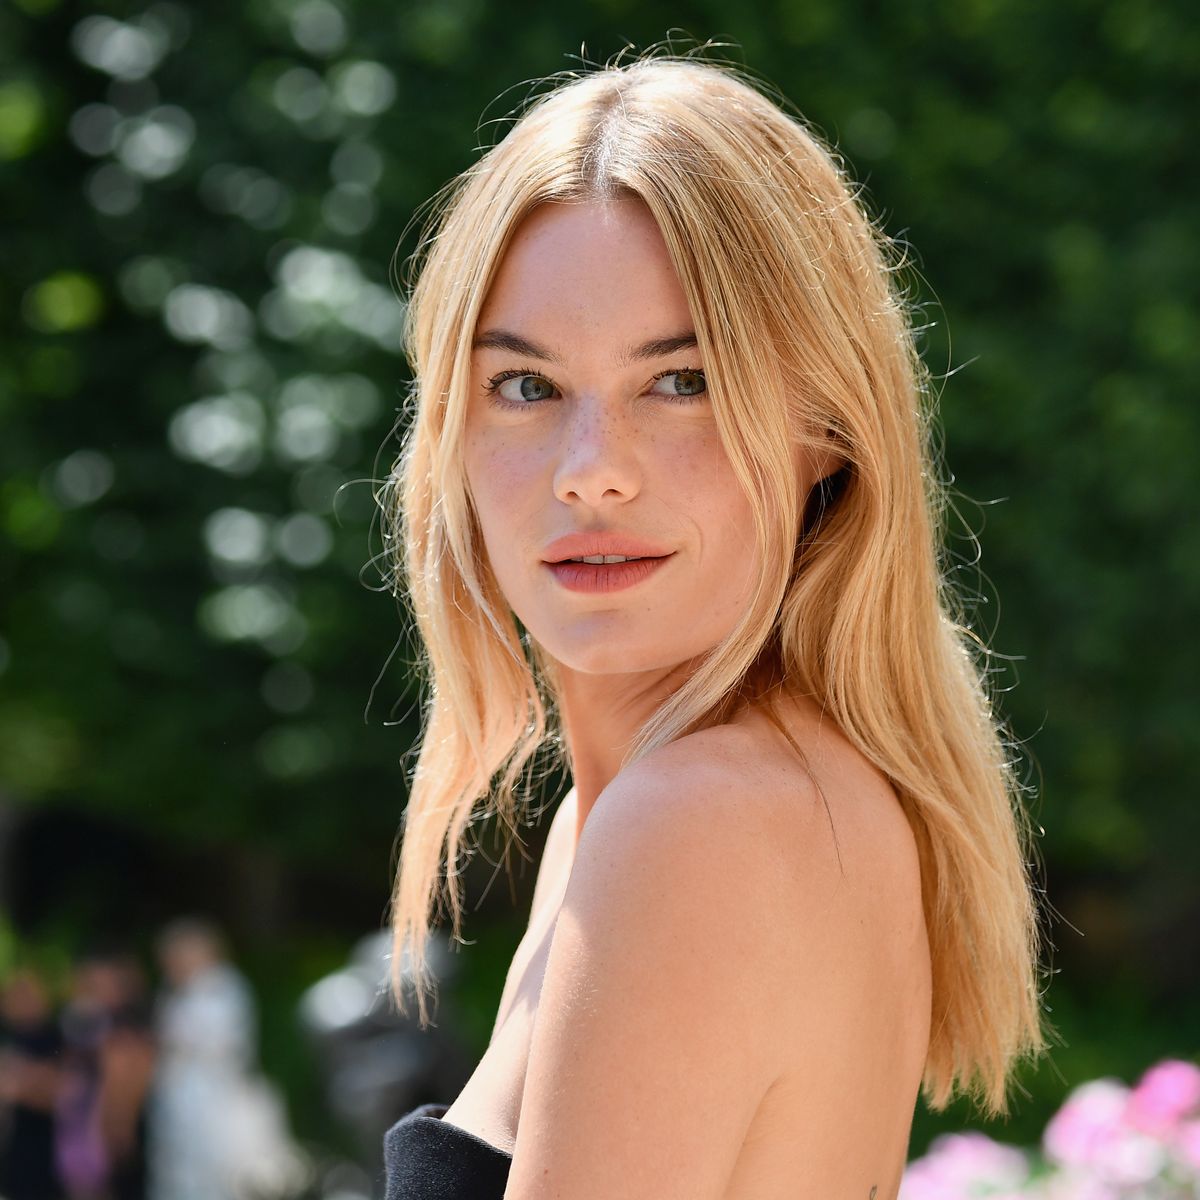 What is it about the features of Lily-Rose and Camille Rowe that